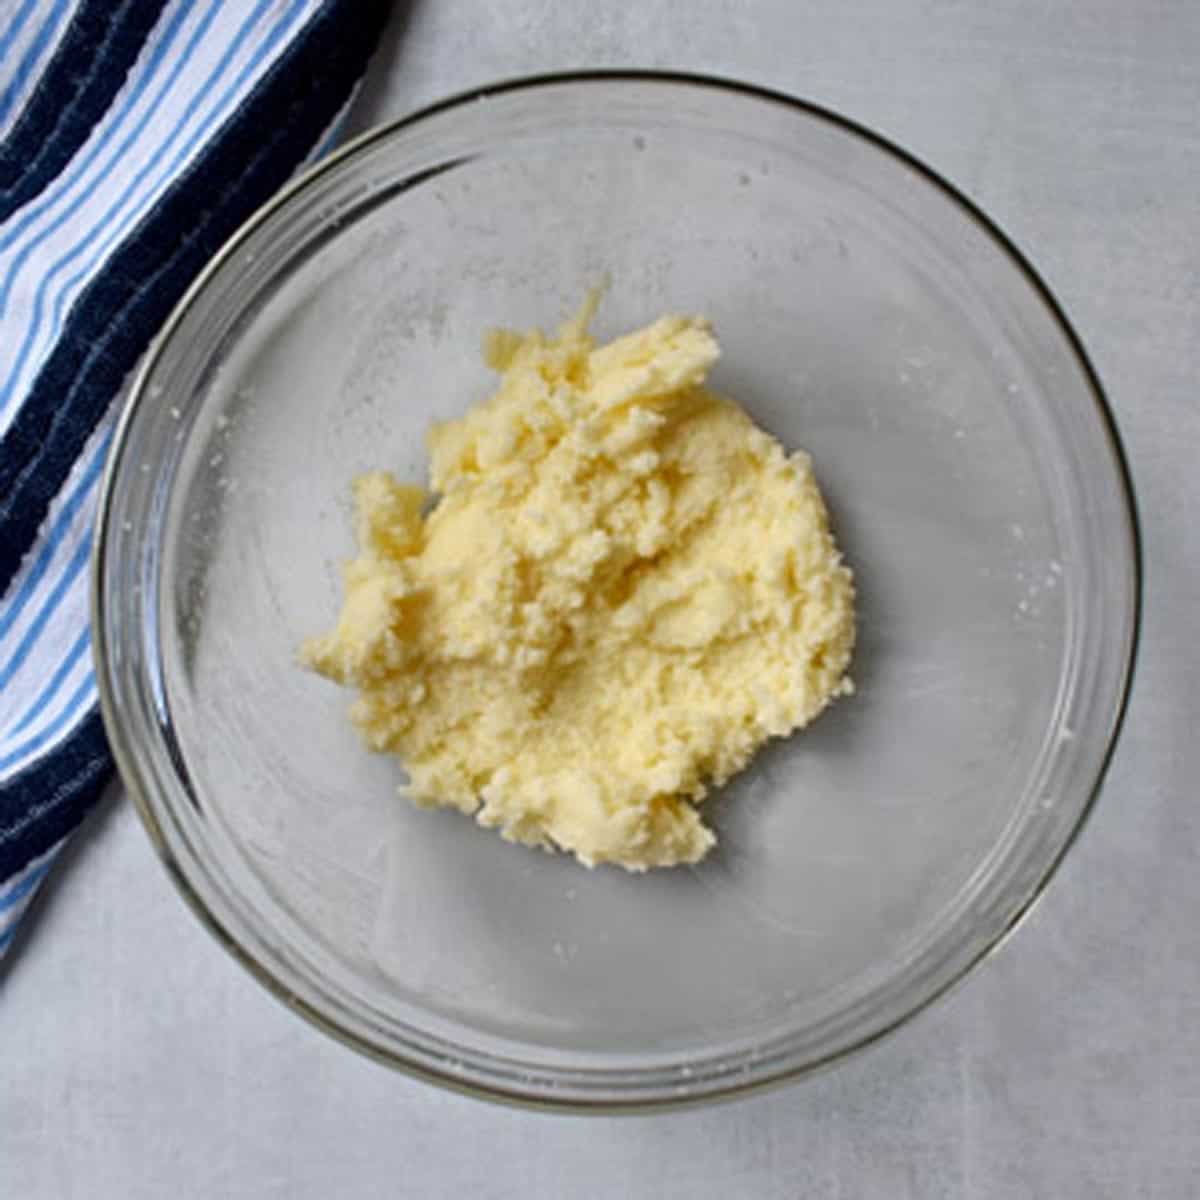 Butter and sugar creamed together in glass mixing bowl.